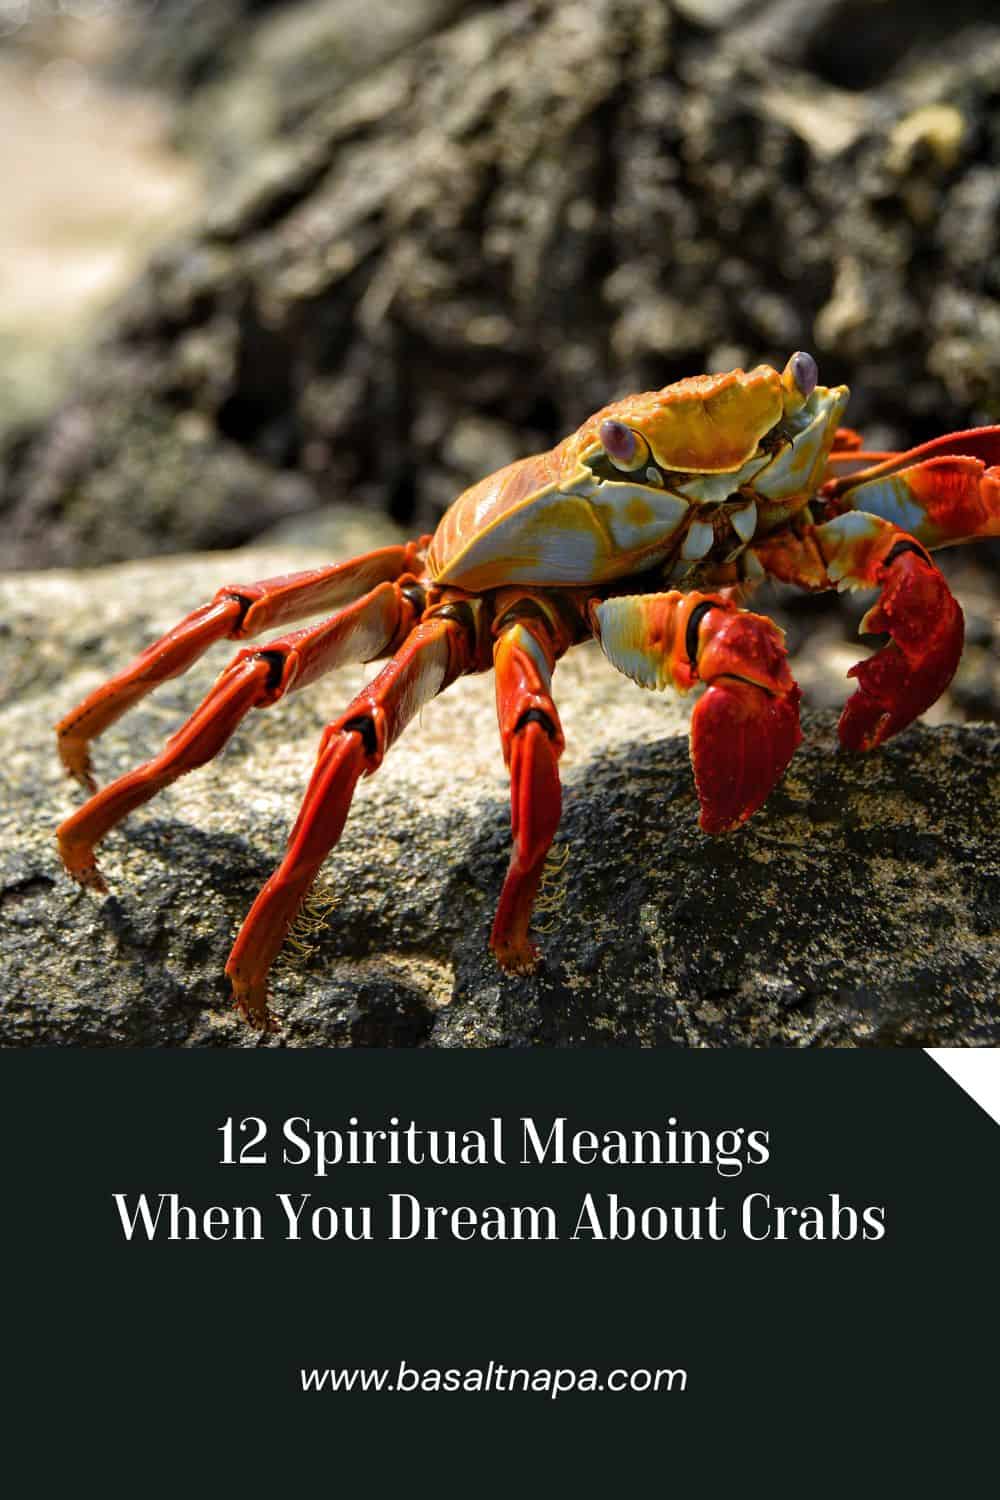 Spiritual Meanings When Dream About Crabs